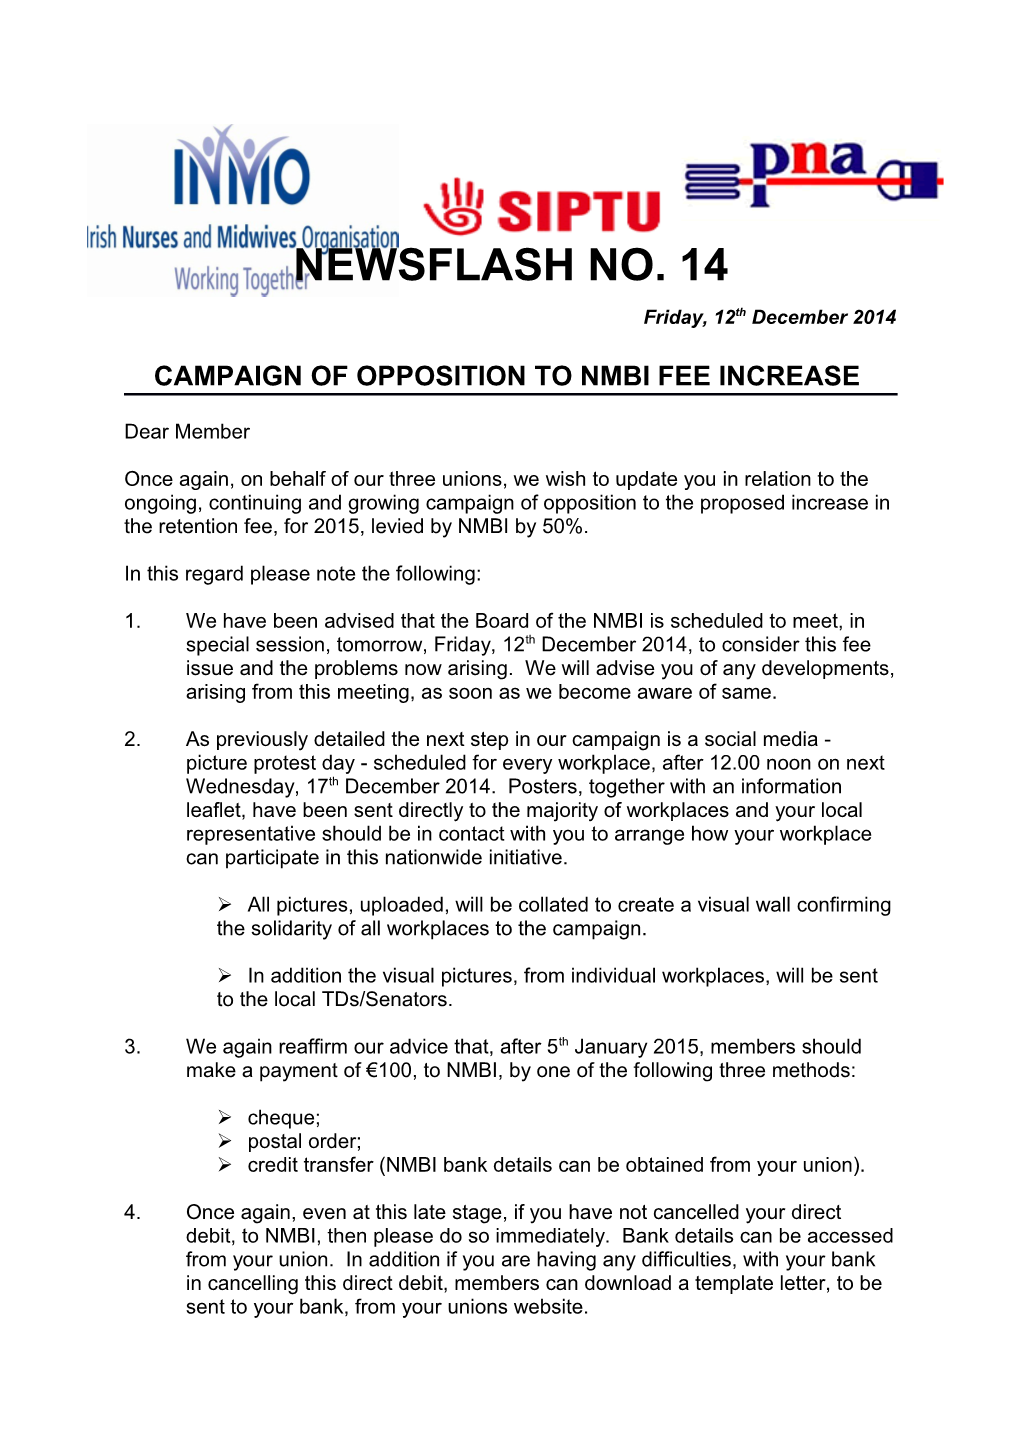 Campaign of Opposition to Nmbi Fee Increase